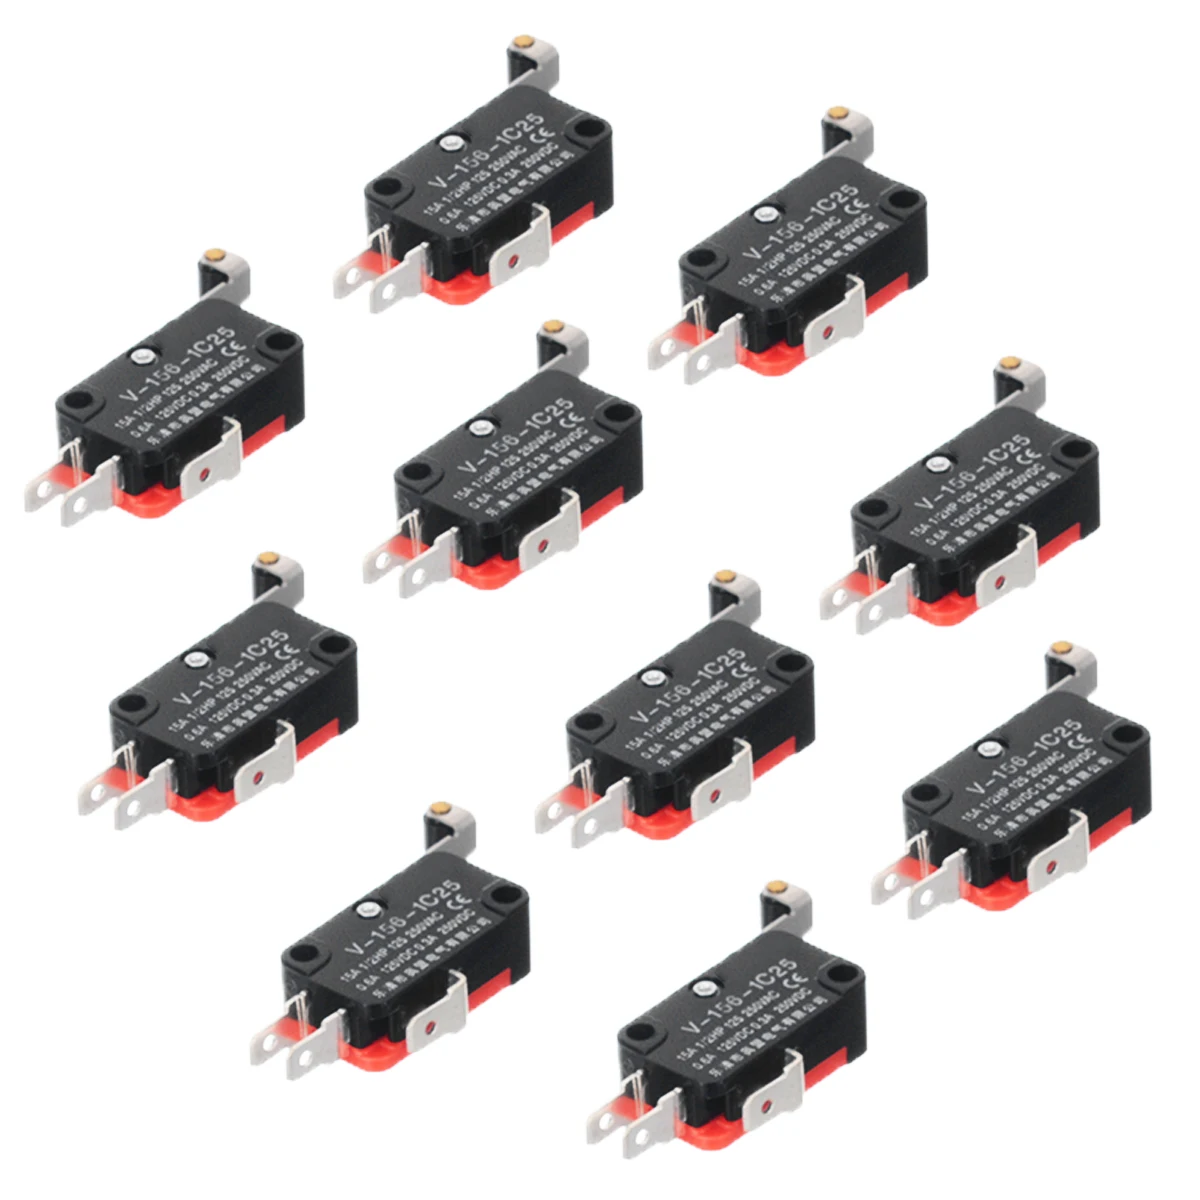 10pcs V-156-1C25 Micro Limit Switch Long Hinge Roller Momentary SPDT Snap Action 